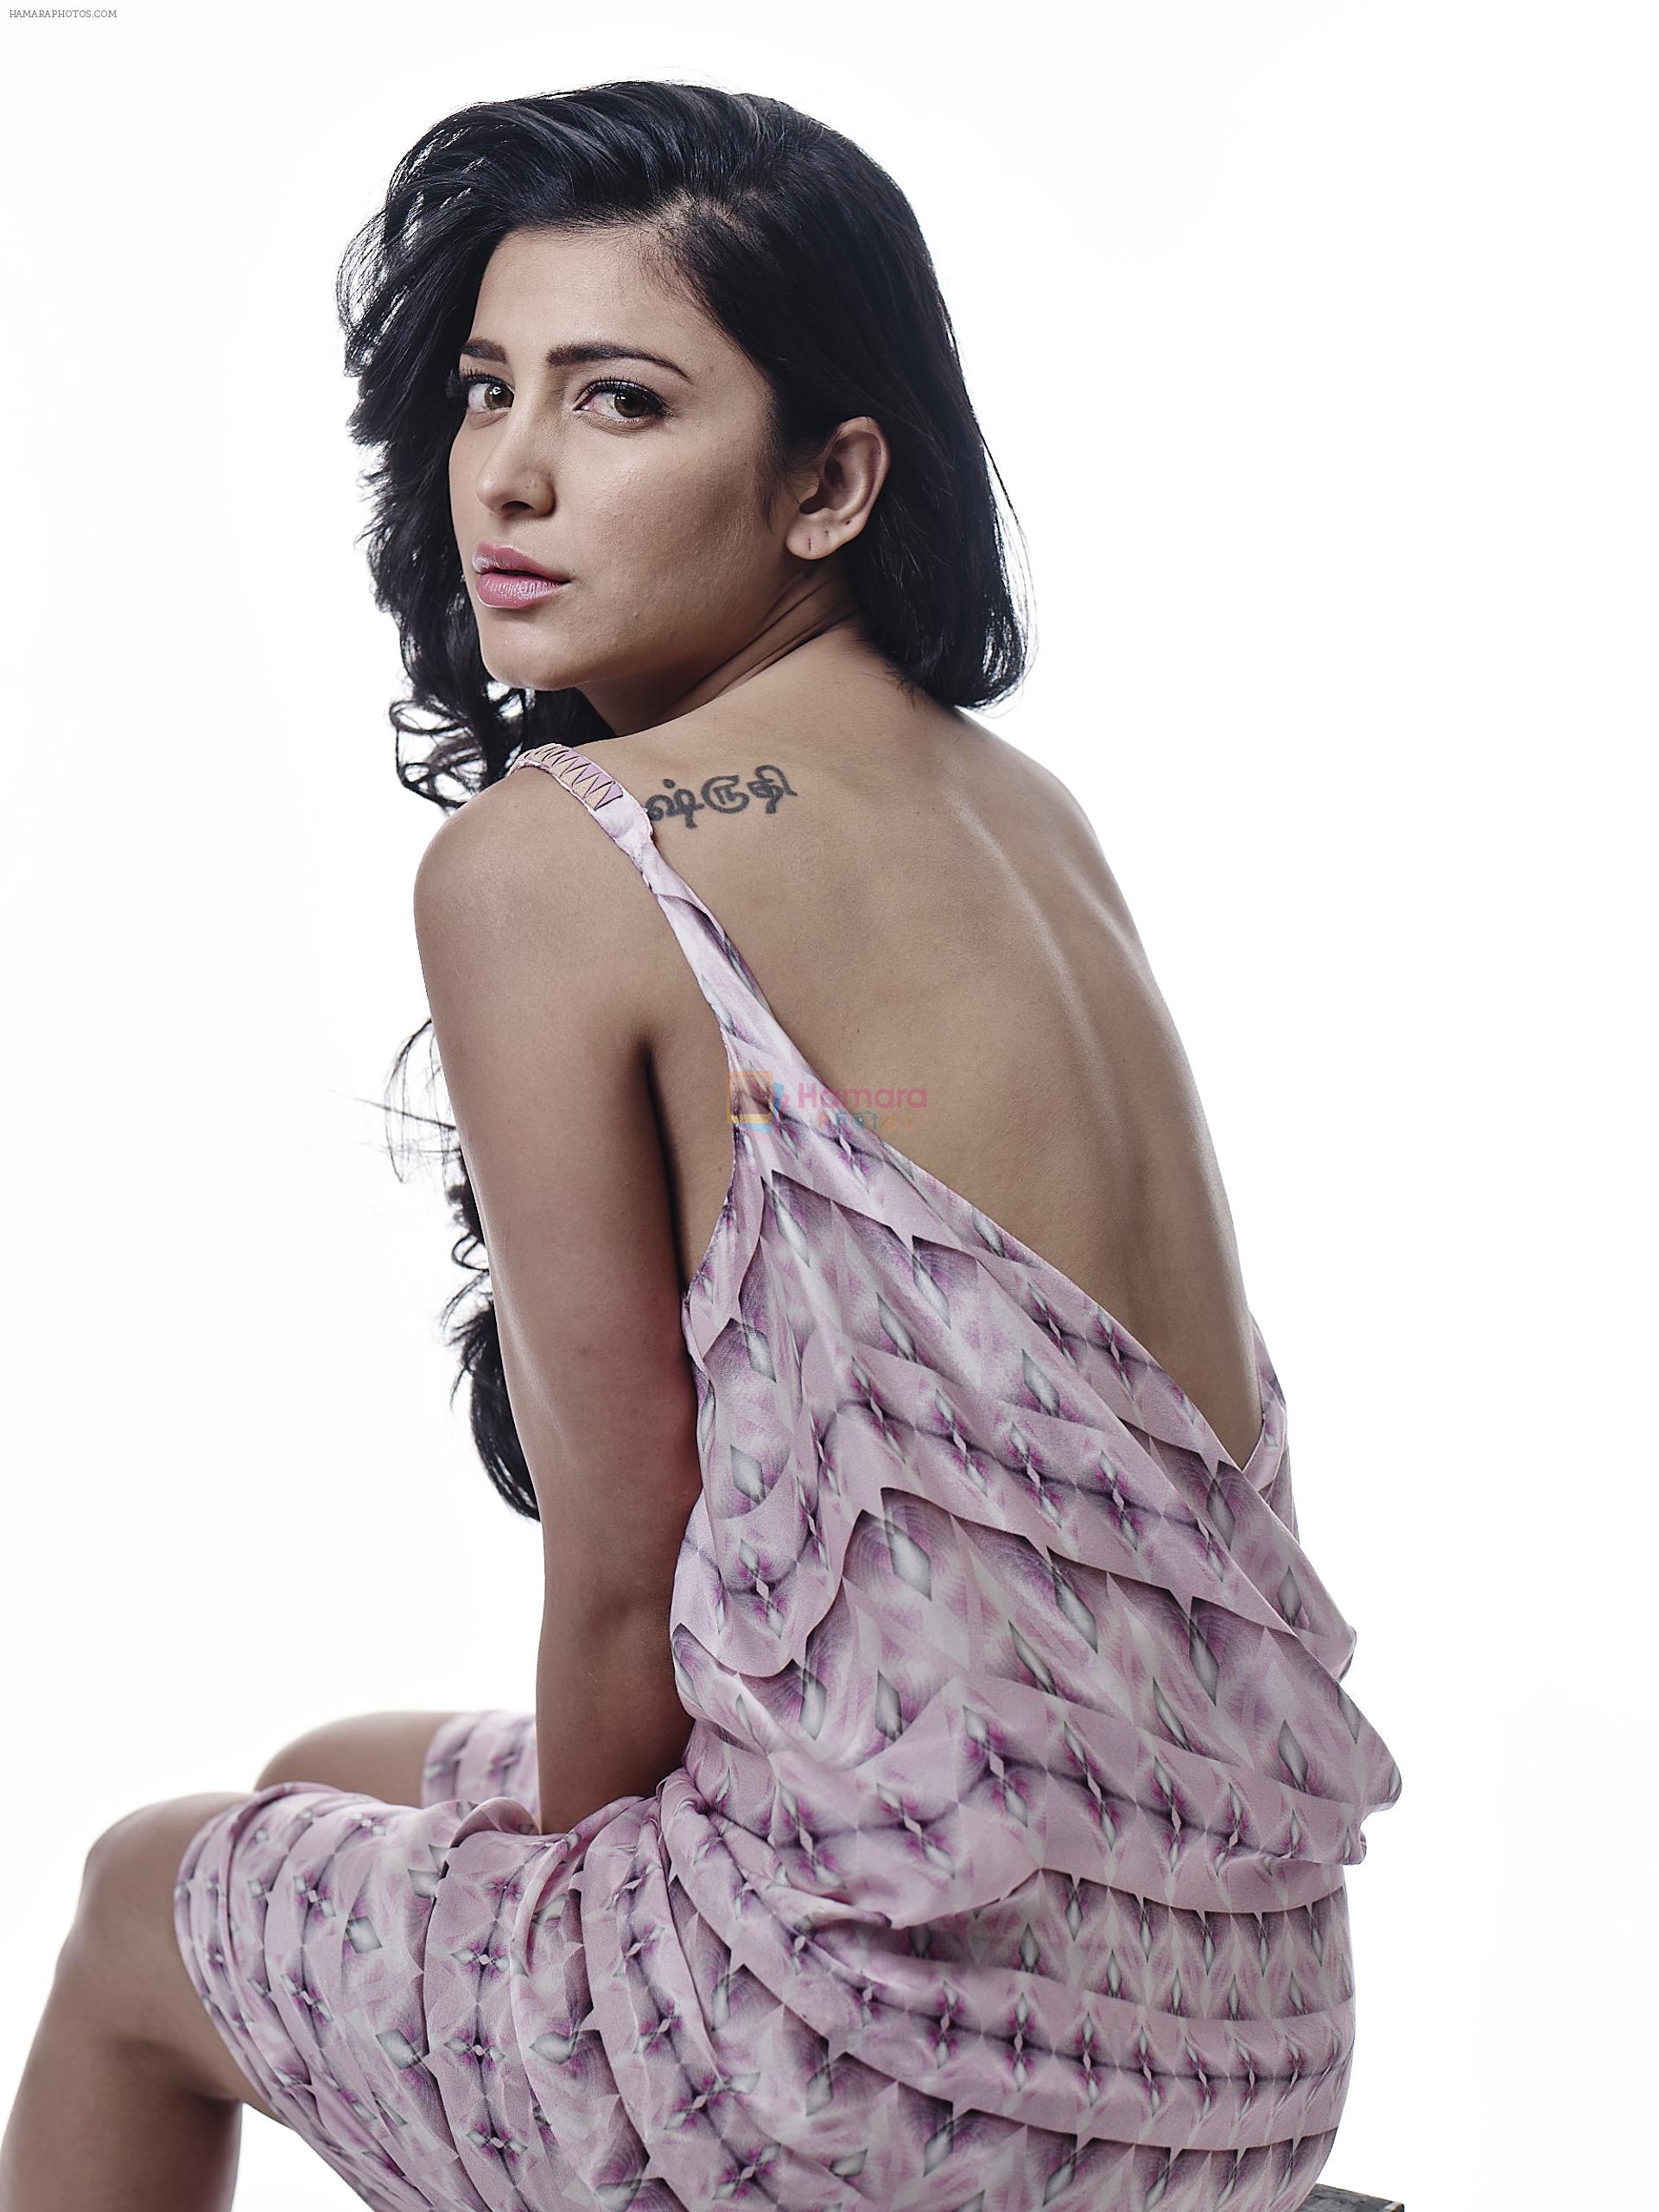 Shruti Haasan launches her own production company - Isidro